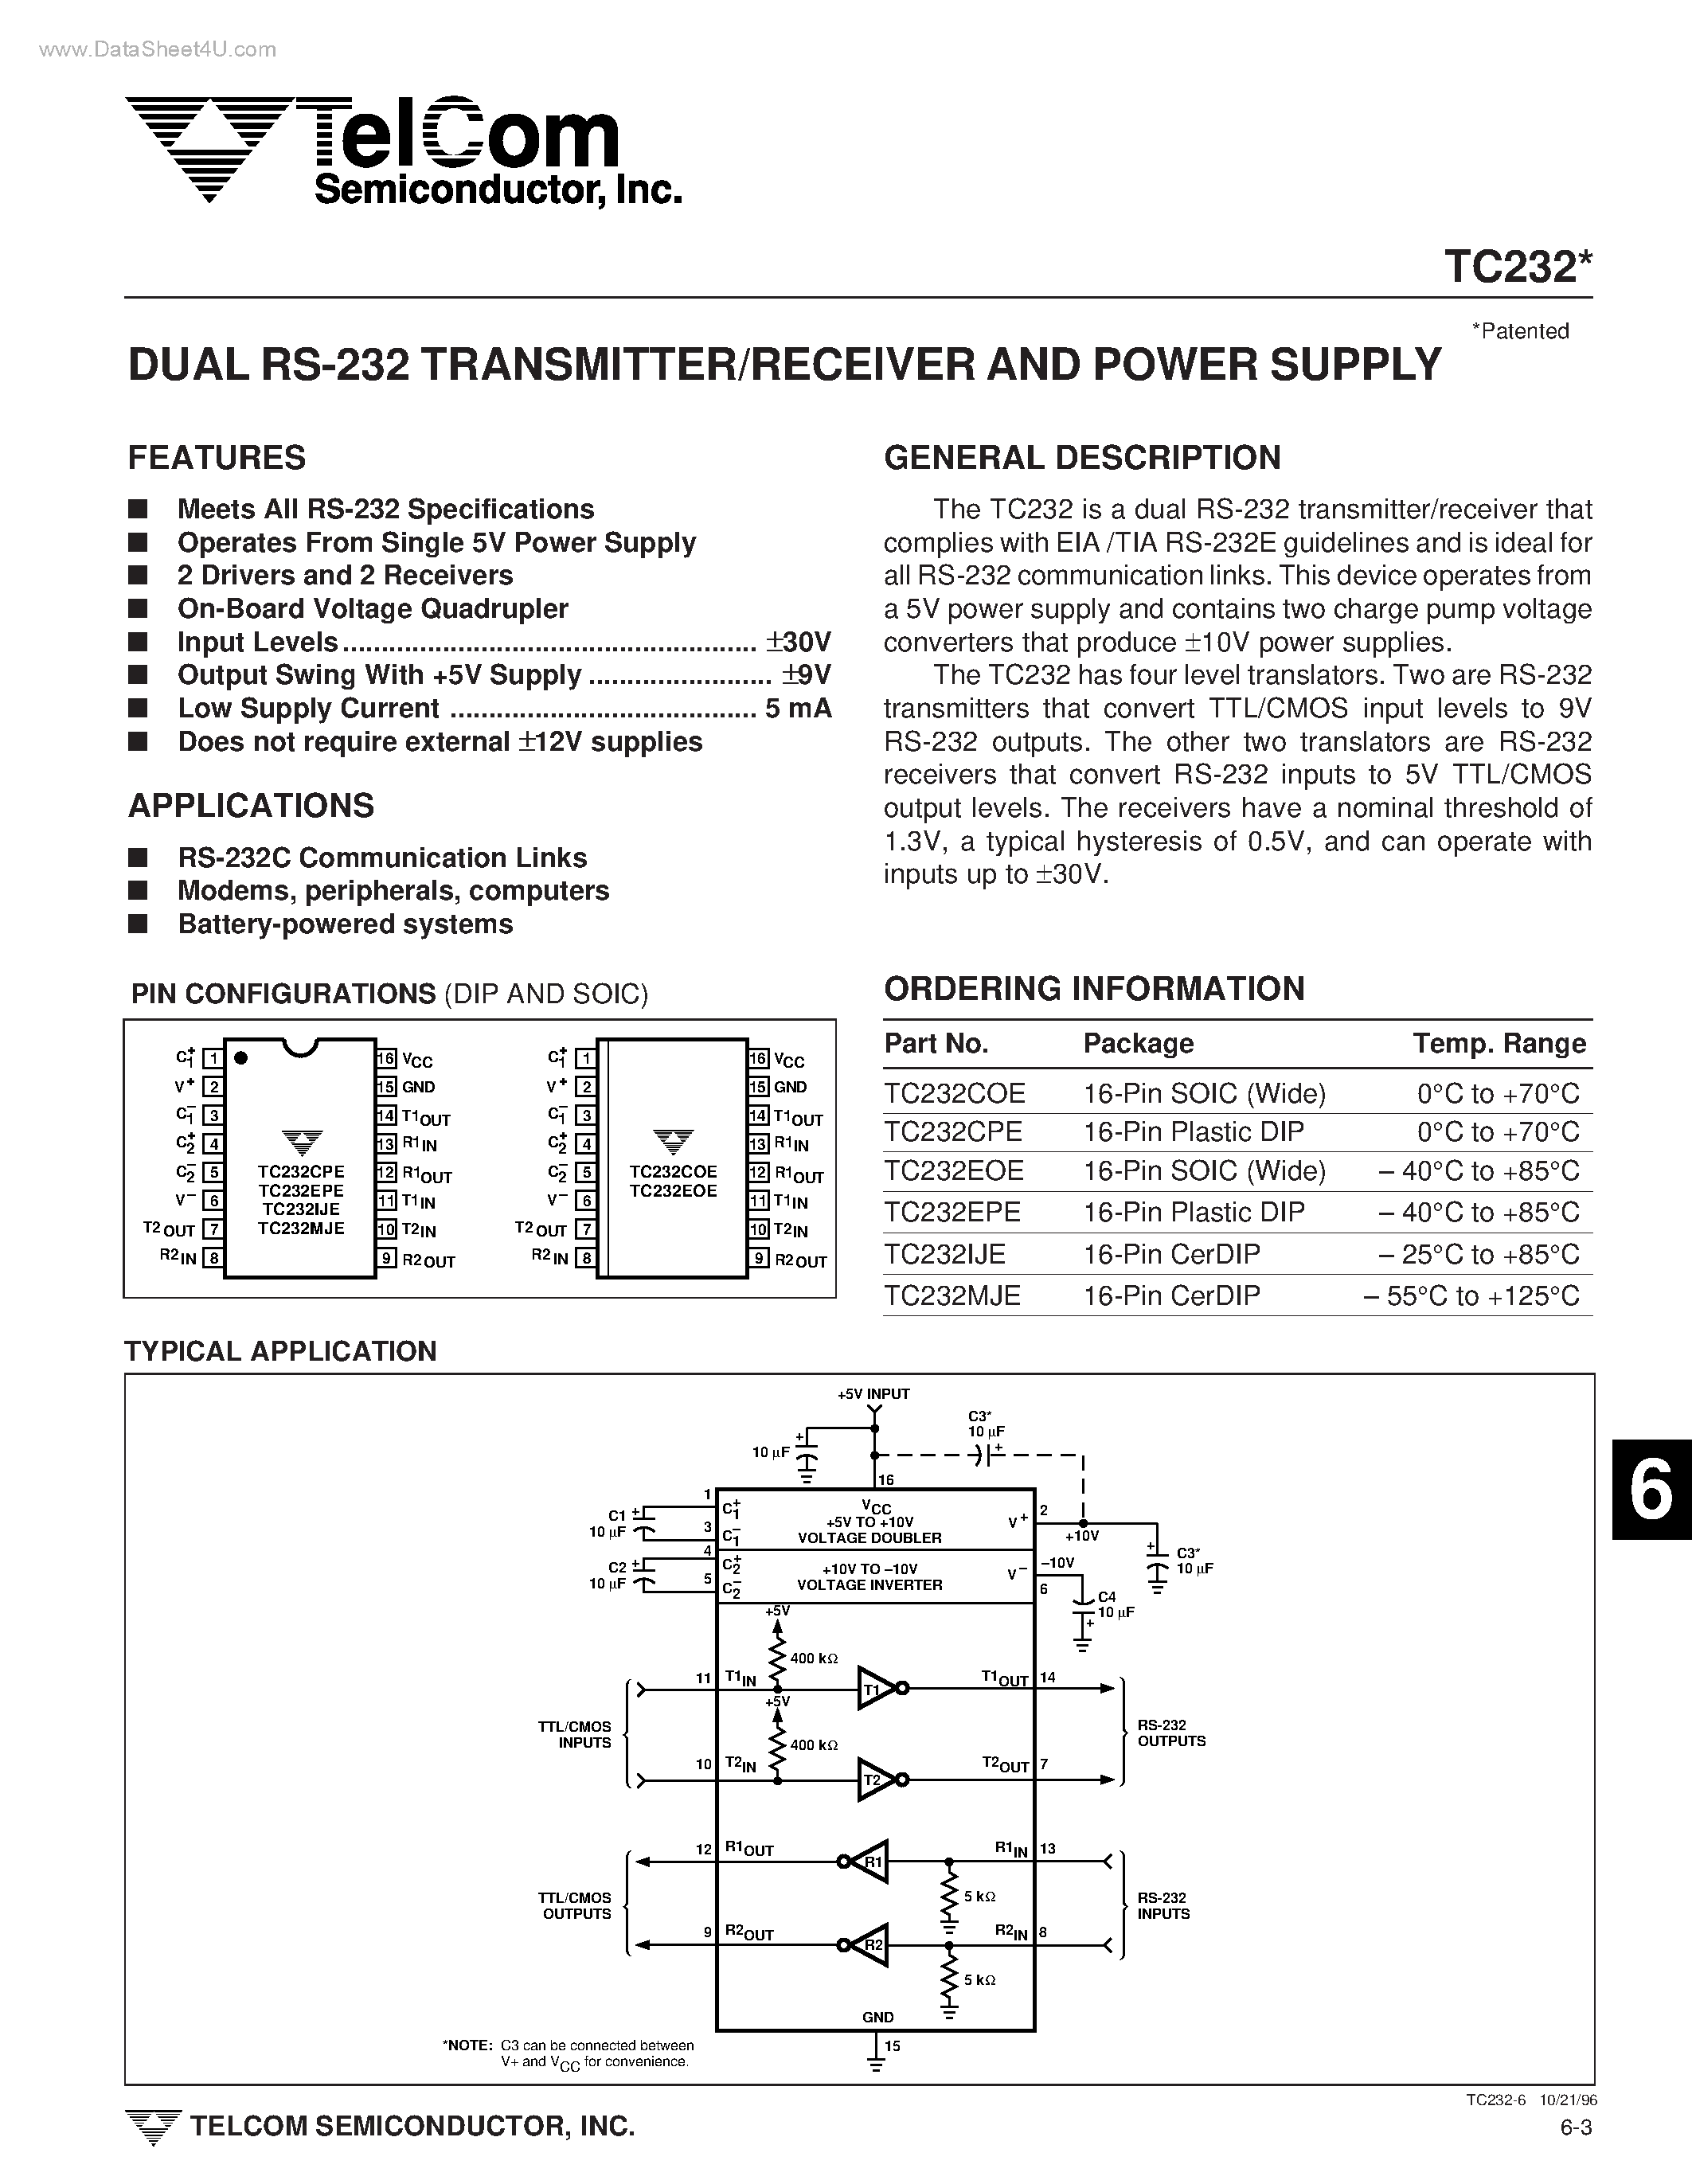 Даташит TC232 - DUAL RS-232 TRANSMITTER/RECEIVER AND POWER SUPPLY страница 1